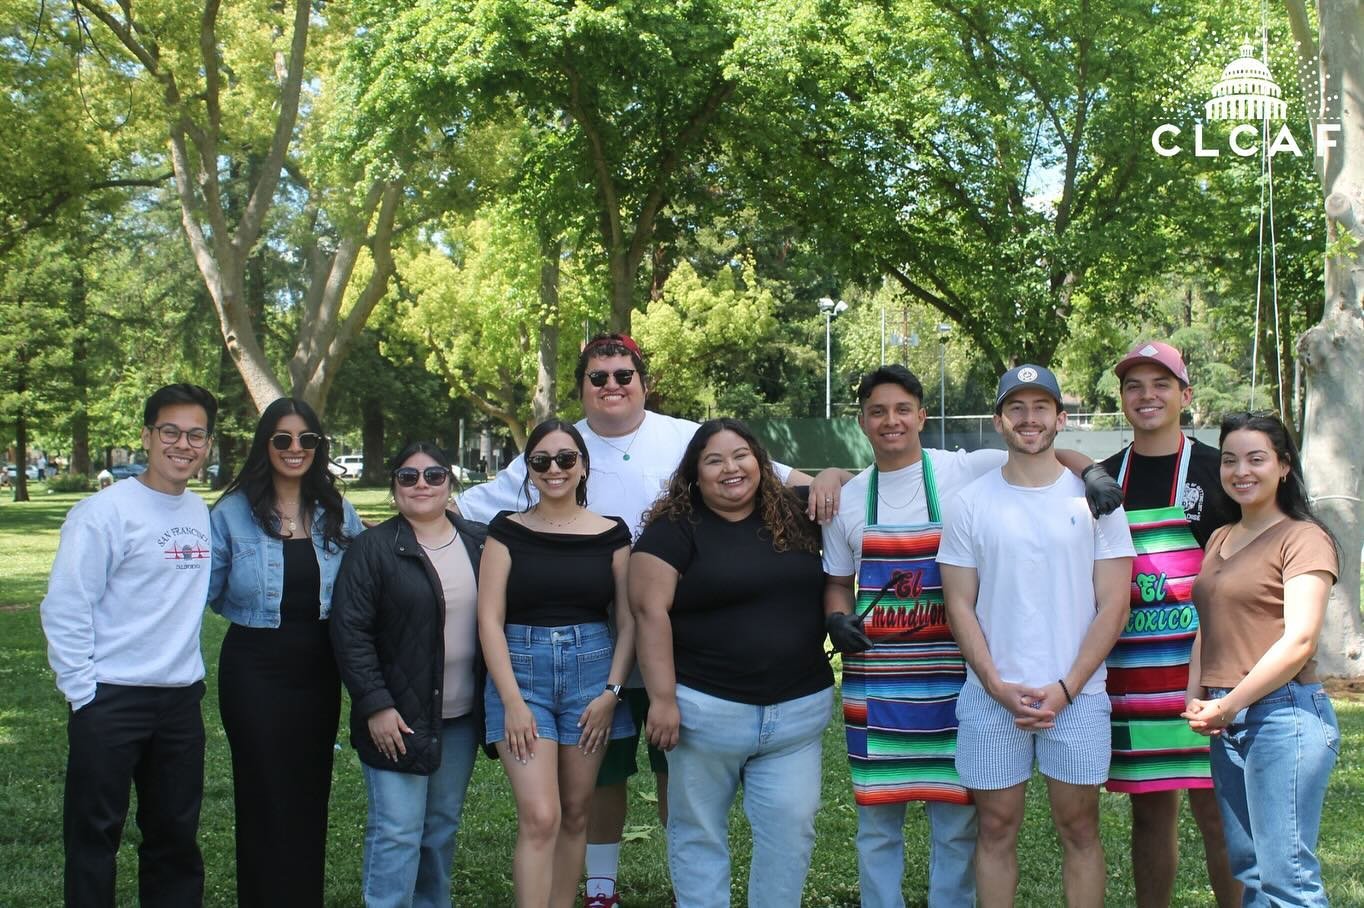 Thank you for joining us for our annual carne asada last Sunday at the park! ☀️ Special thanks to @aguasfrescas_sacramento for the delicious aguas!